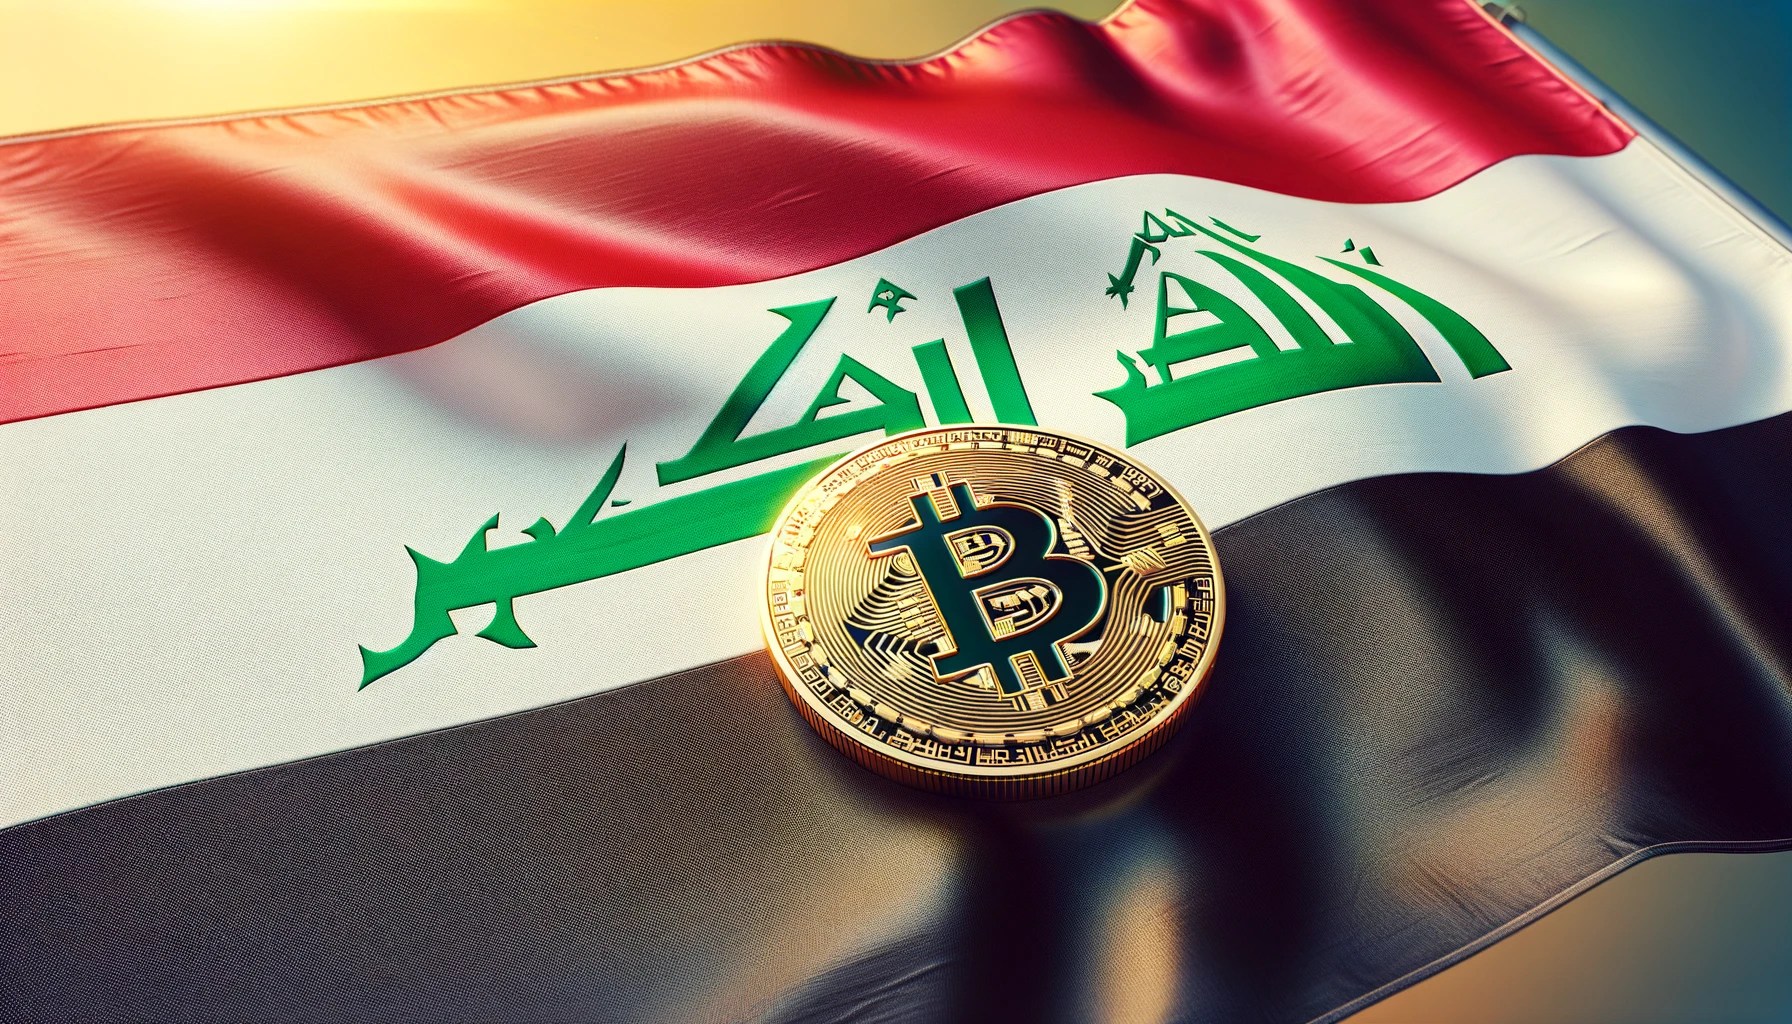 Iraq To Start Bitcoin Mining On A Nation-State Level, Pundit Claims